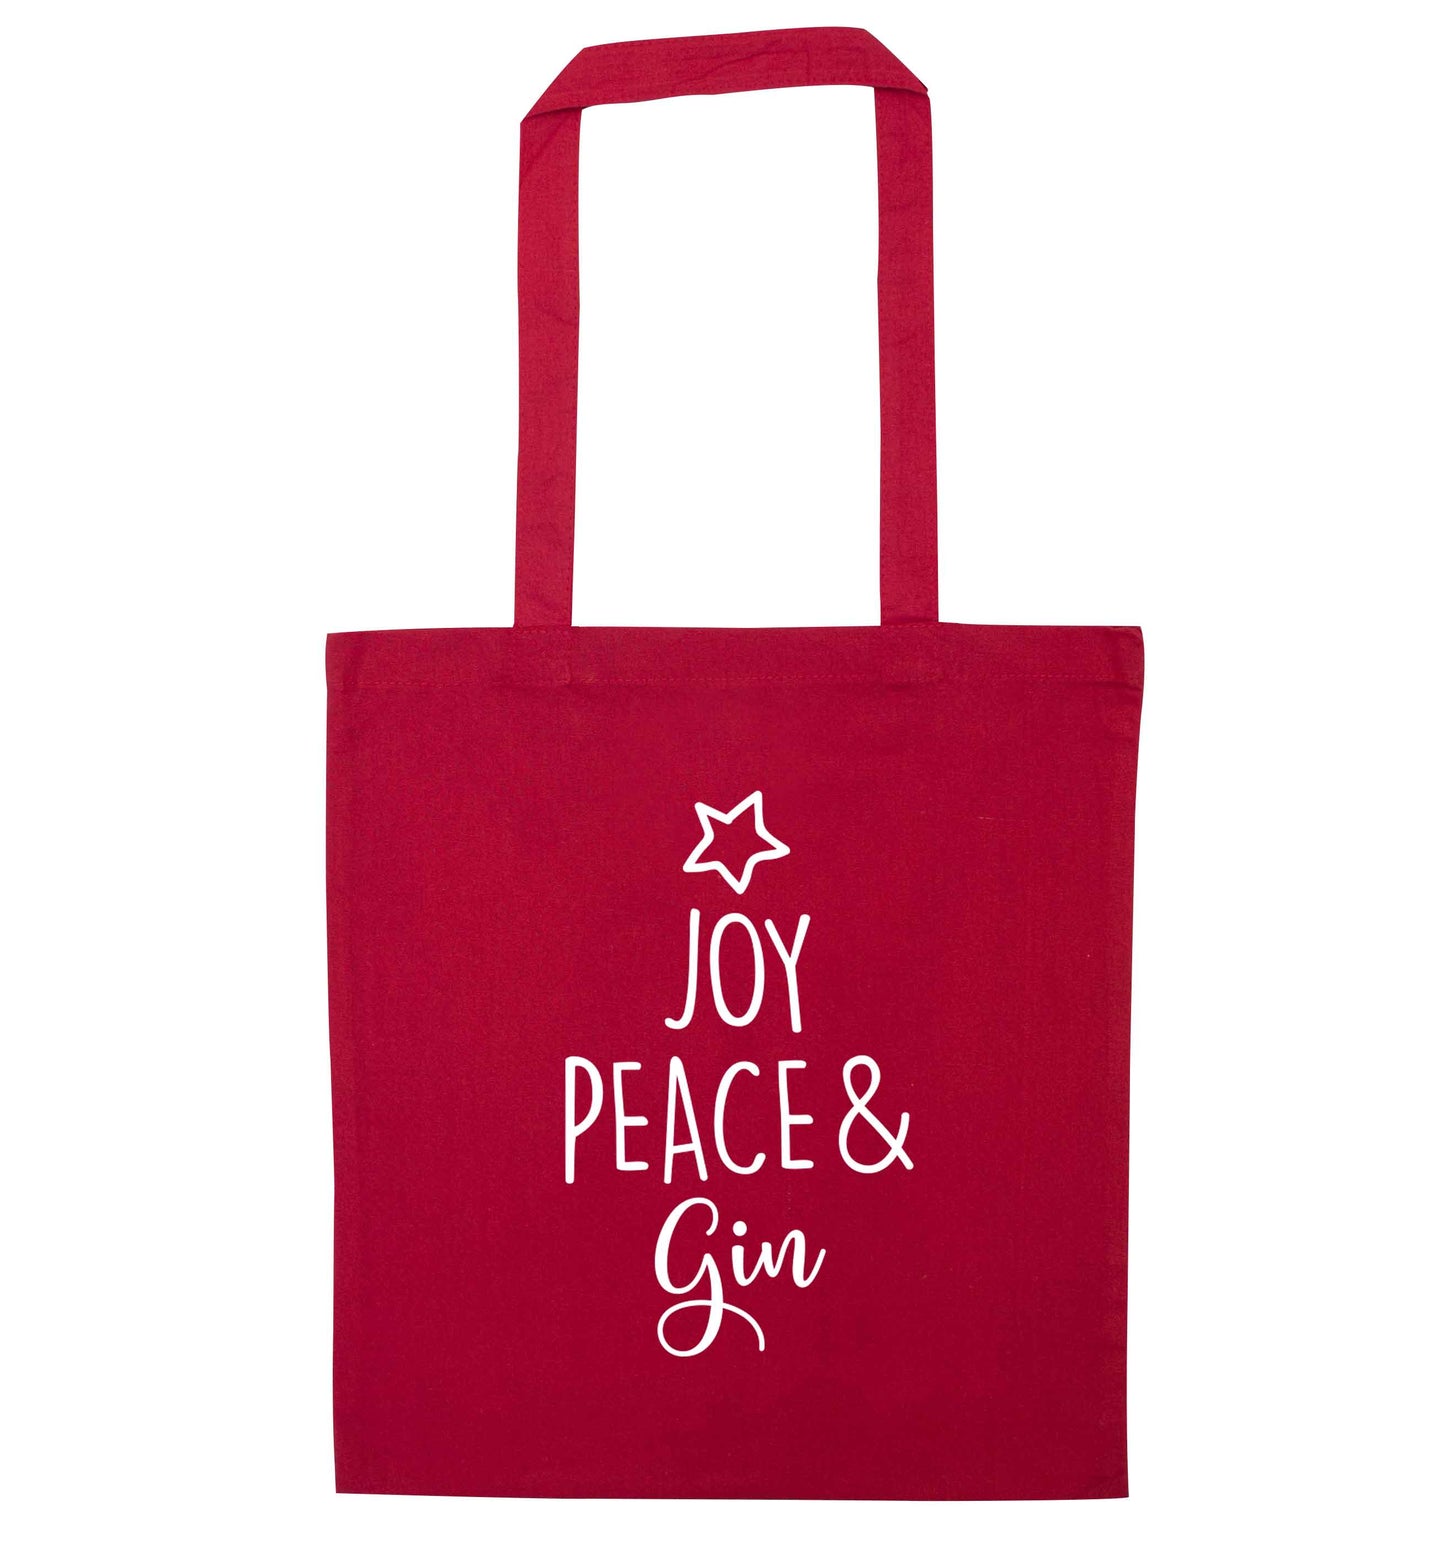 Joy peace and gin red tote bag